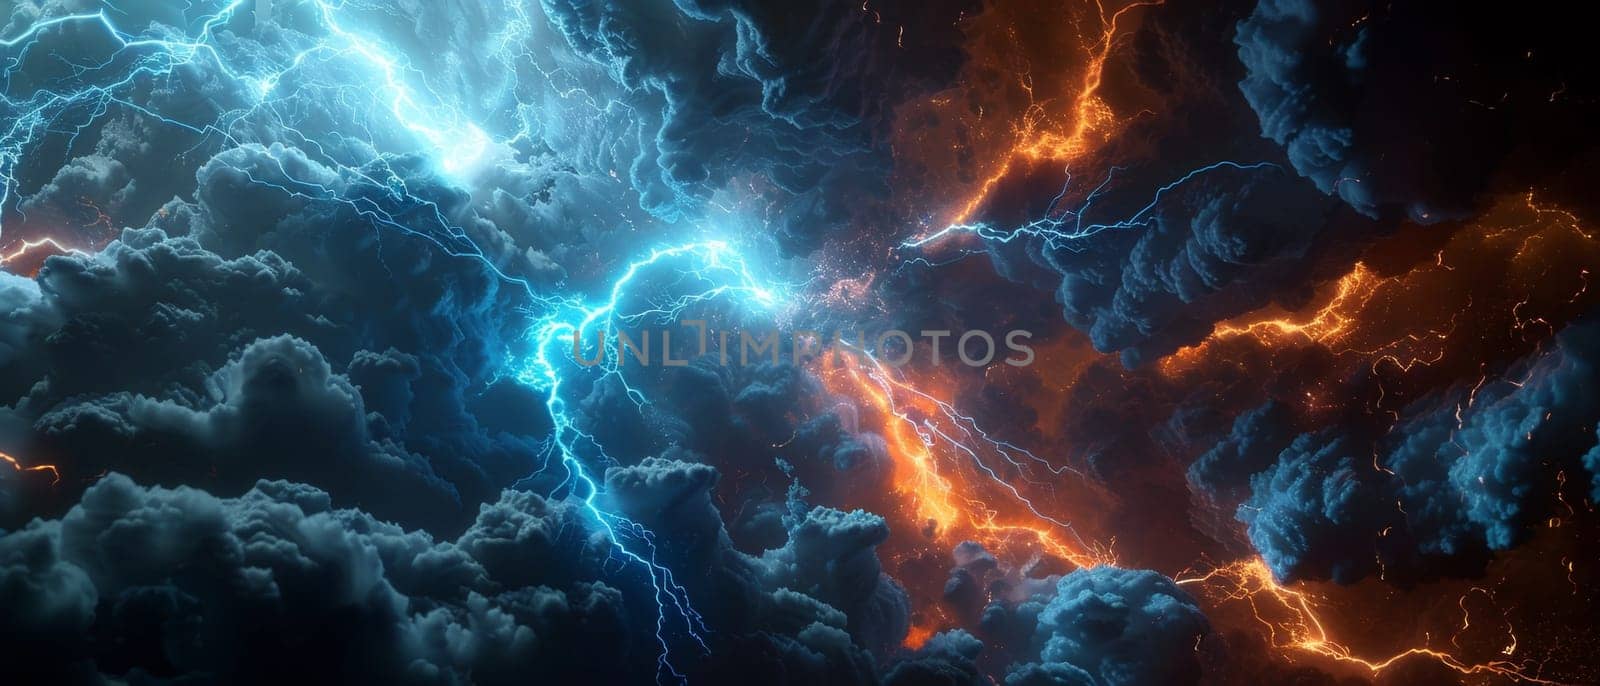 An electrifying widescreen image of dynamic clouds charged with bolts of lightning and fiery energy against a dark sky. 3d rendering colored lightning strike